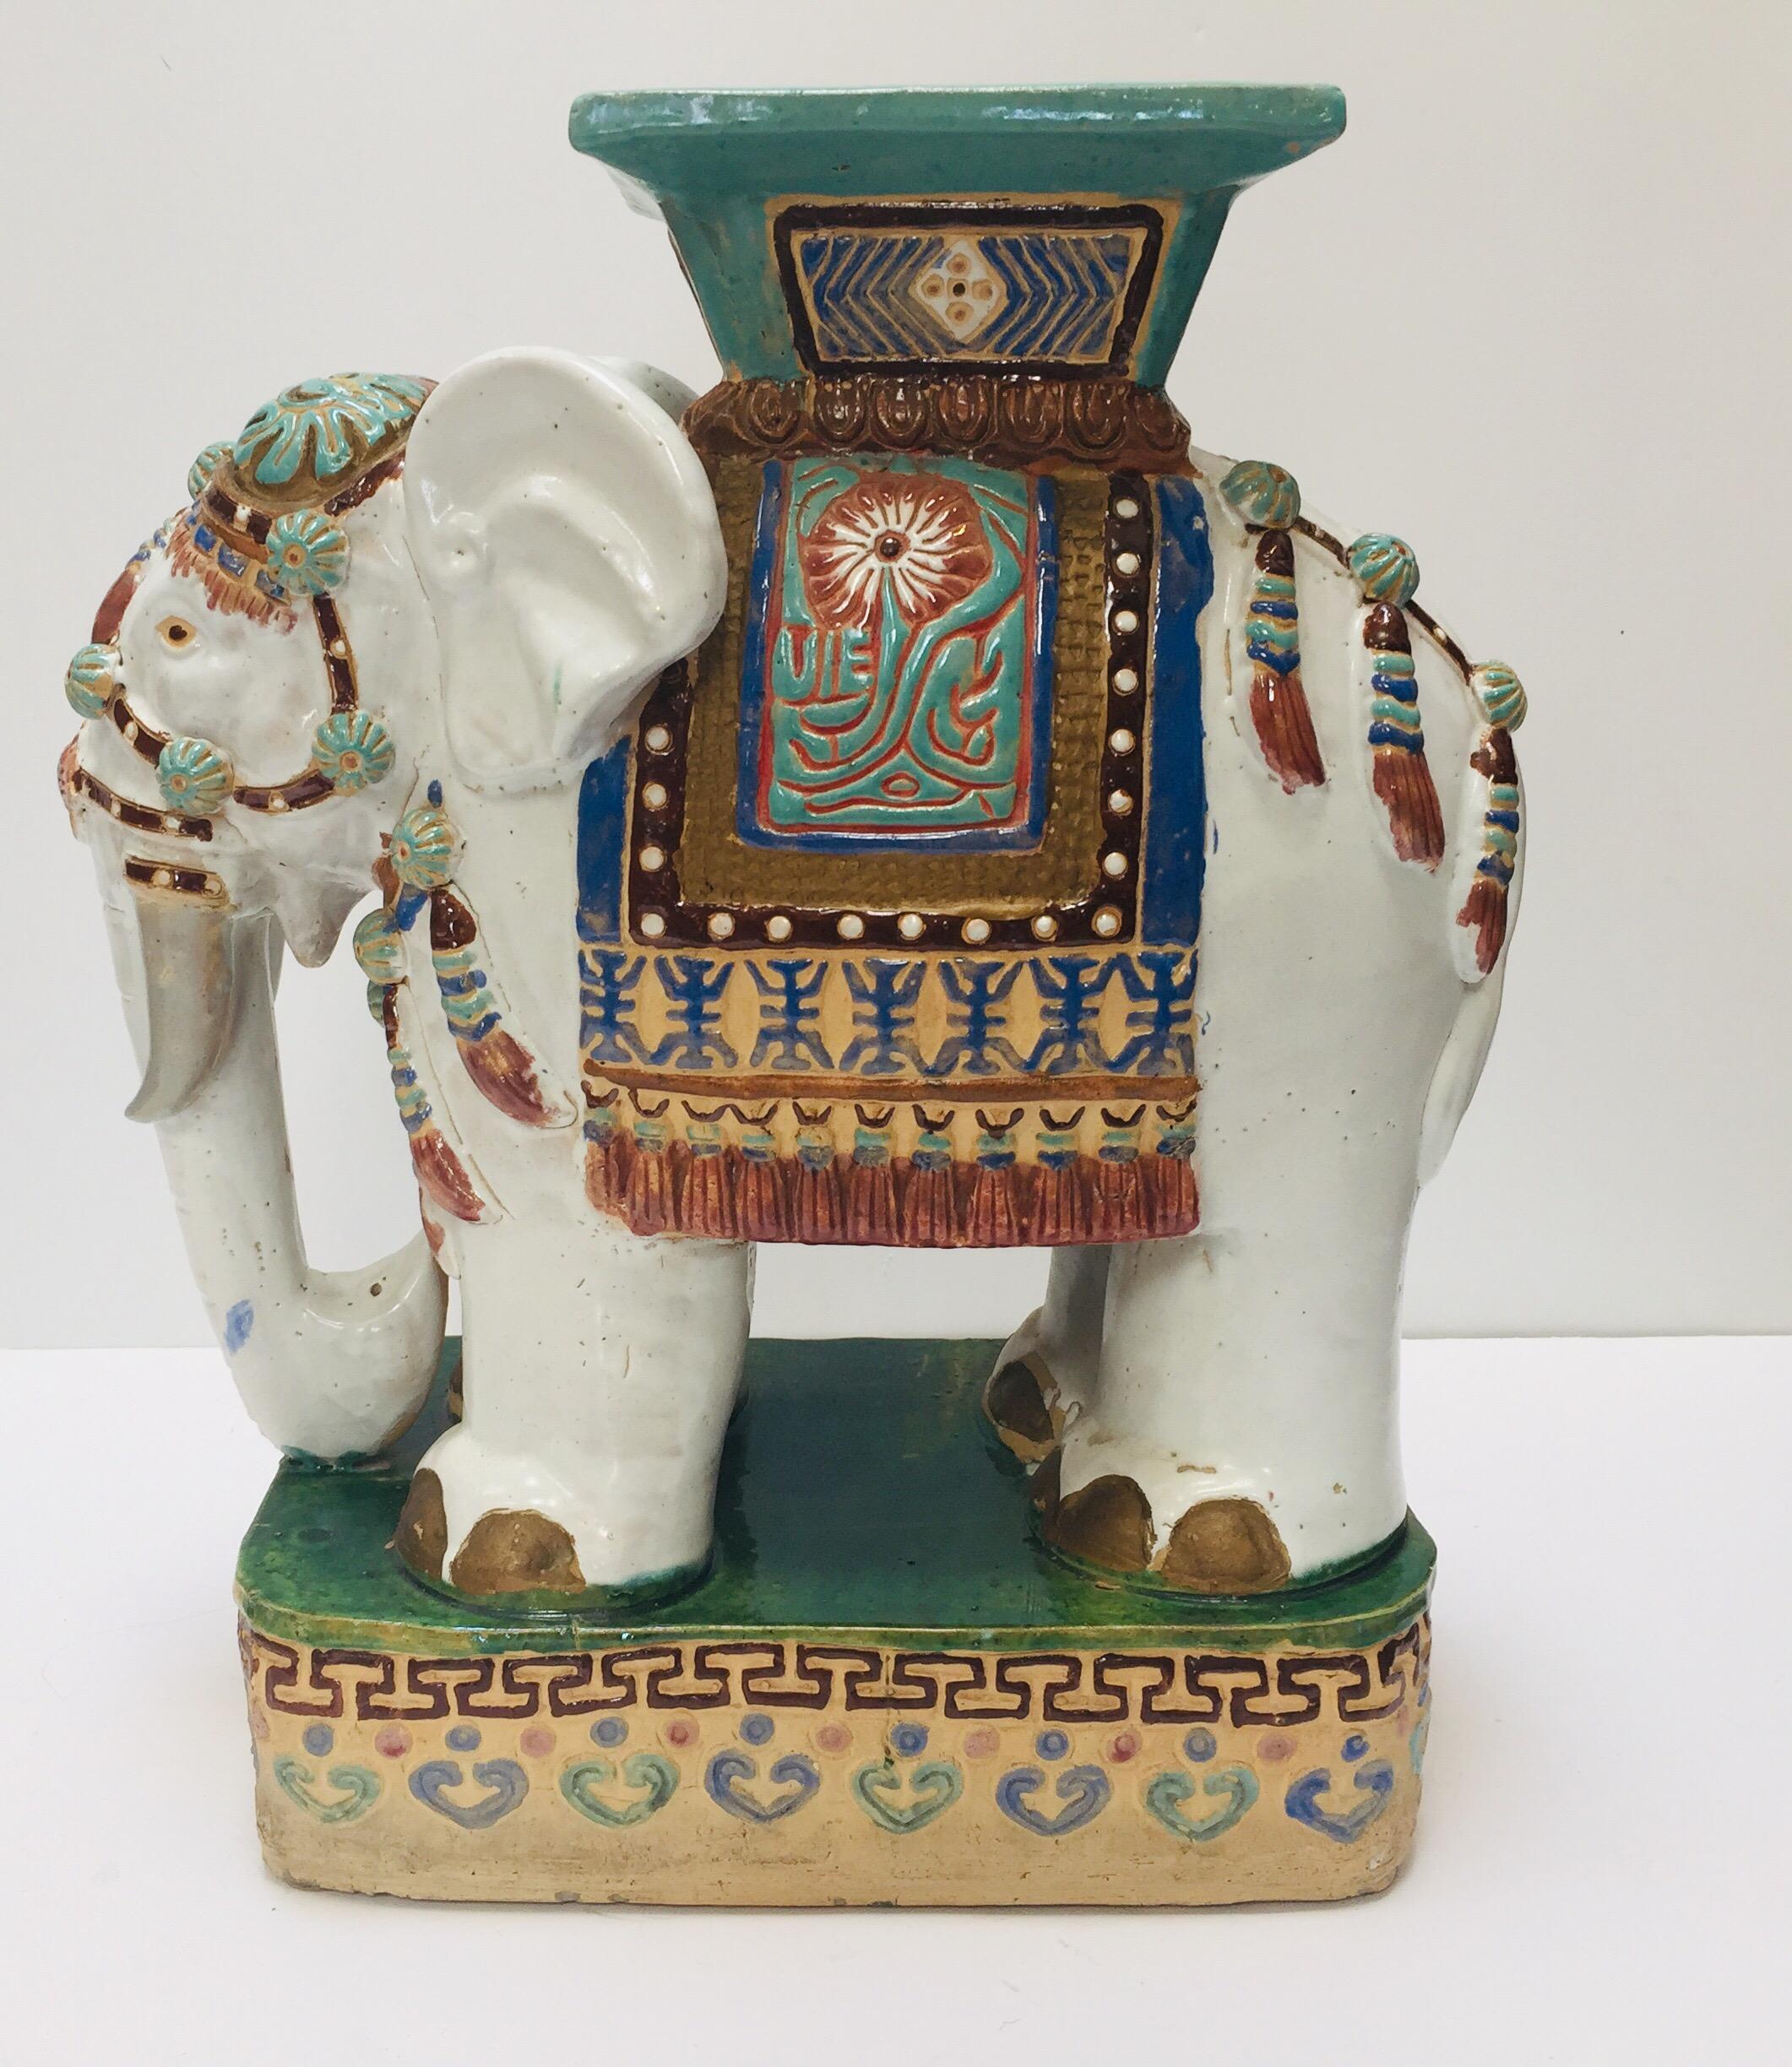 Large vintage midcentury Asian Chinese elephant garden patio stool.
Elegant garden seat in the shape of an elephant heavily decorated in oriental finery. 
The mammal seat on a raised pedestal and has a square seat at the top, it is hand painted in a